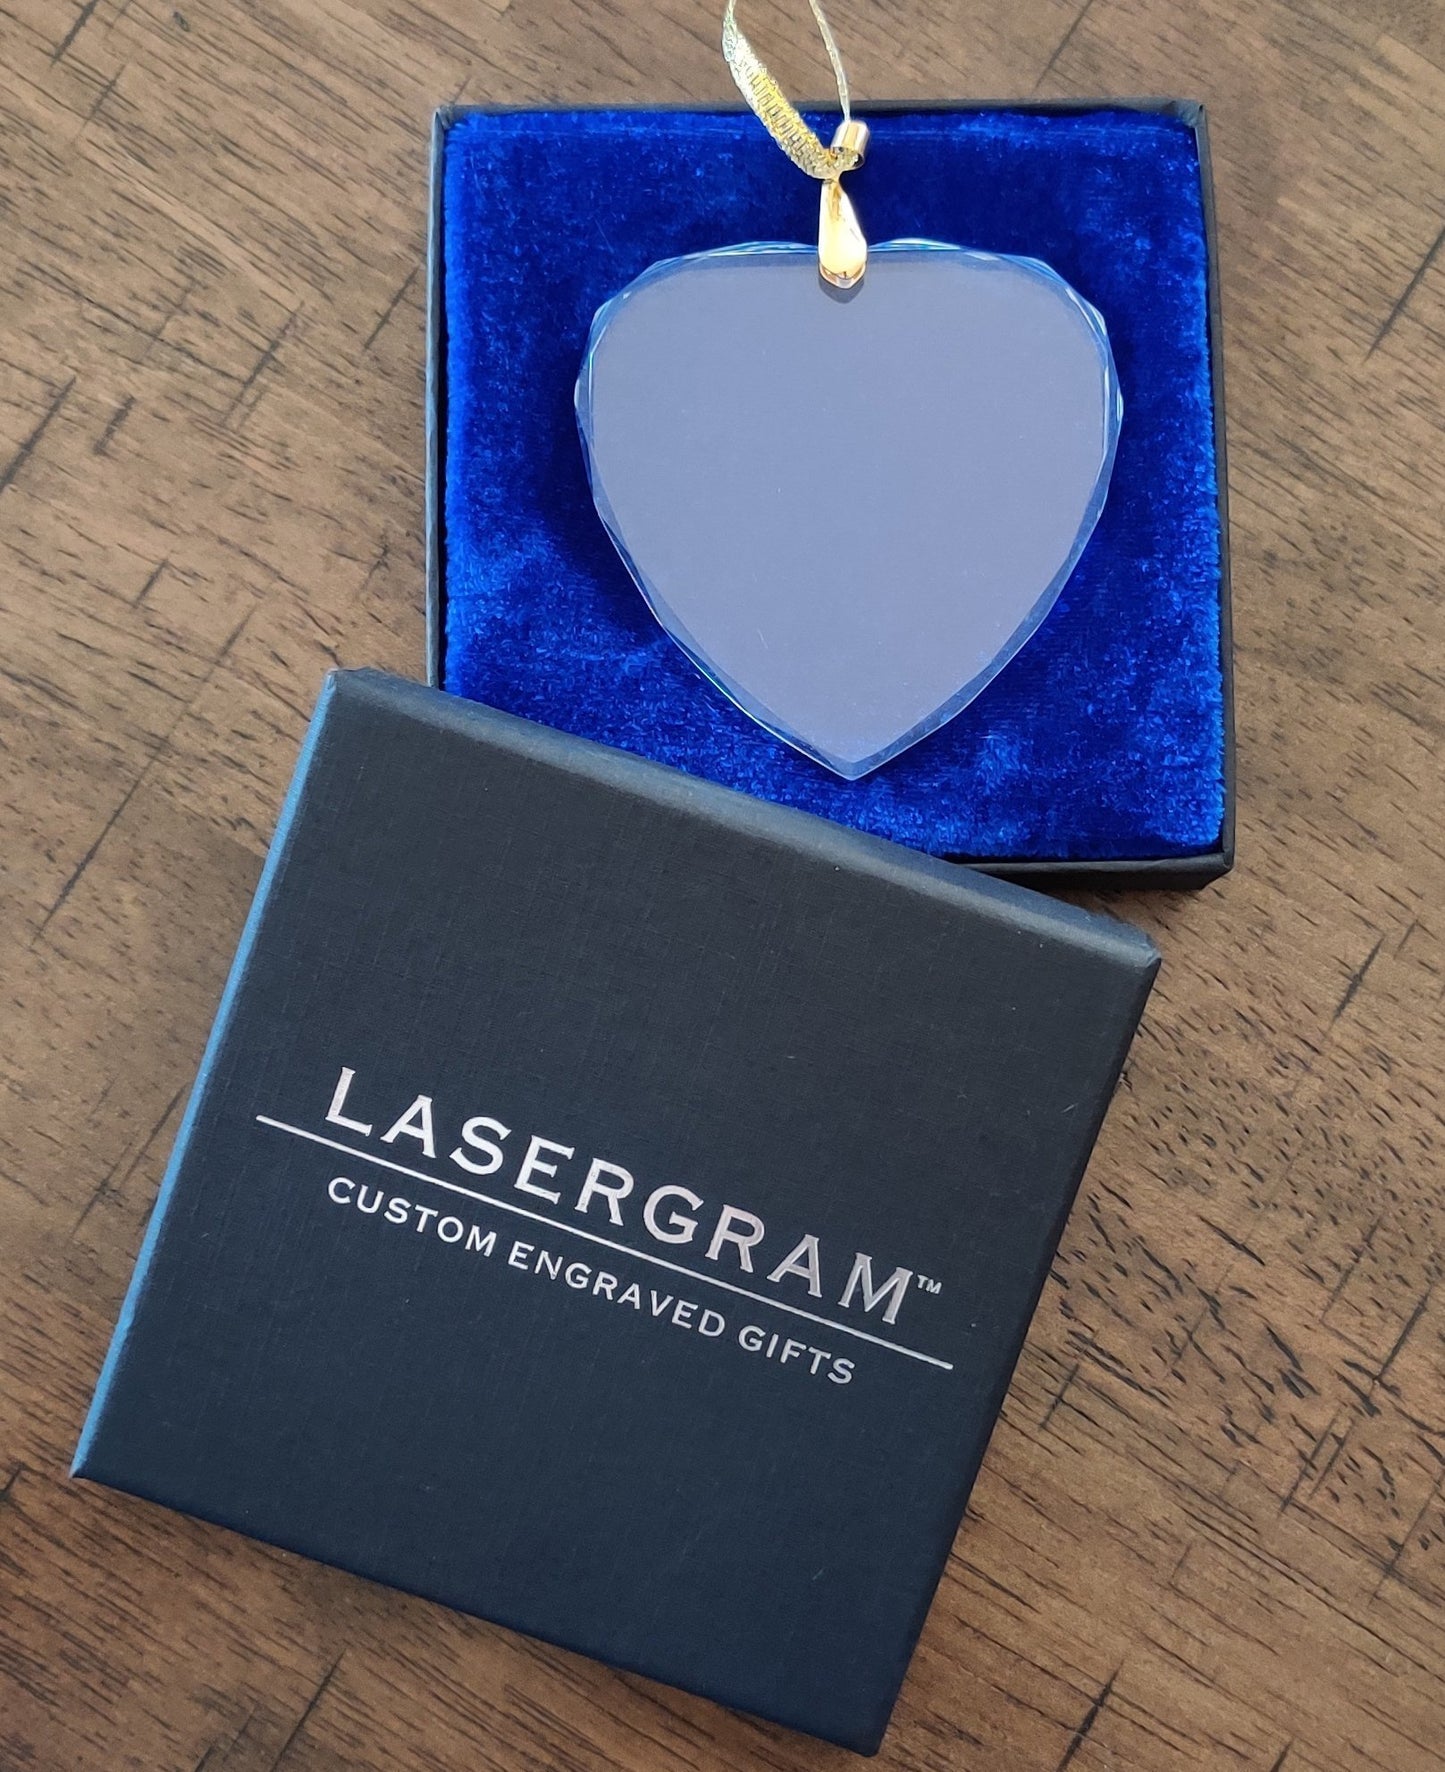 LaserGram Christmas Ornament, World's Greatest Son, Personalized Engraving Included (Heart Shape)